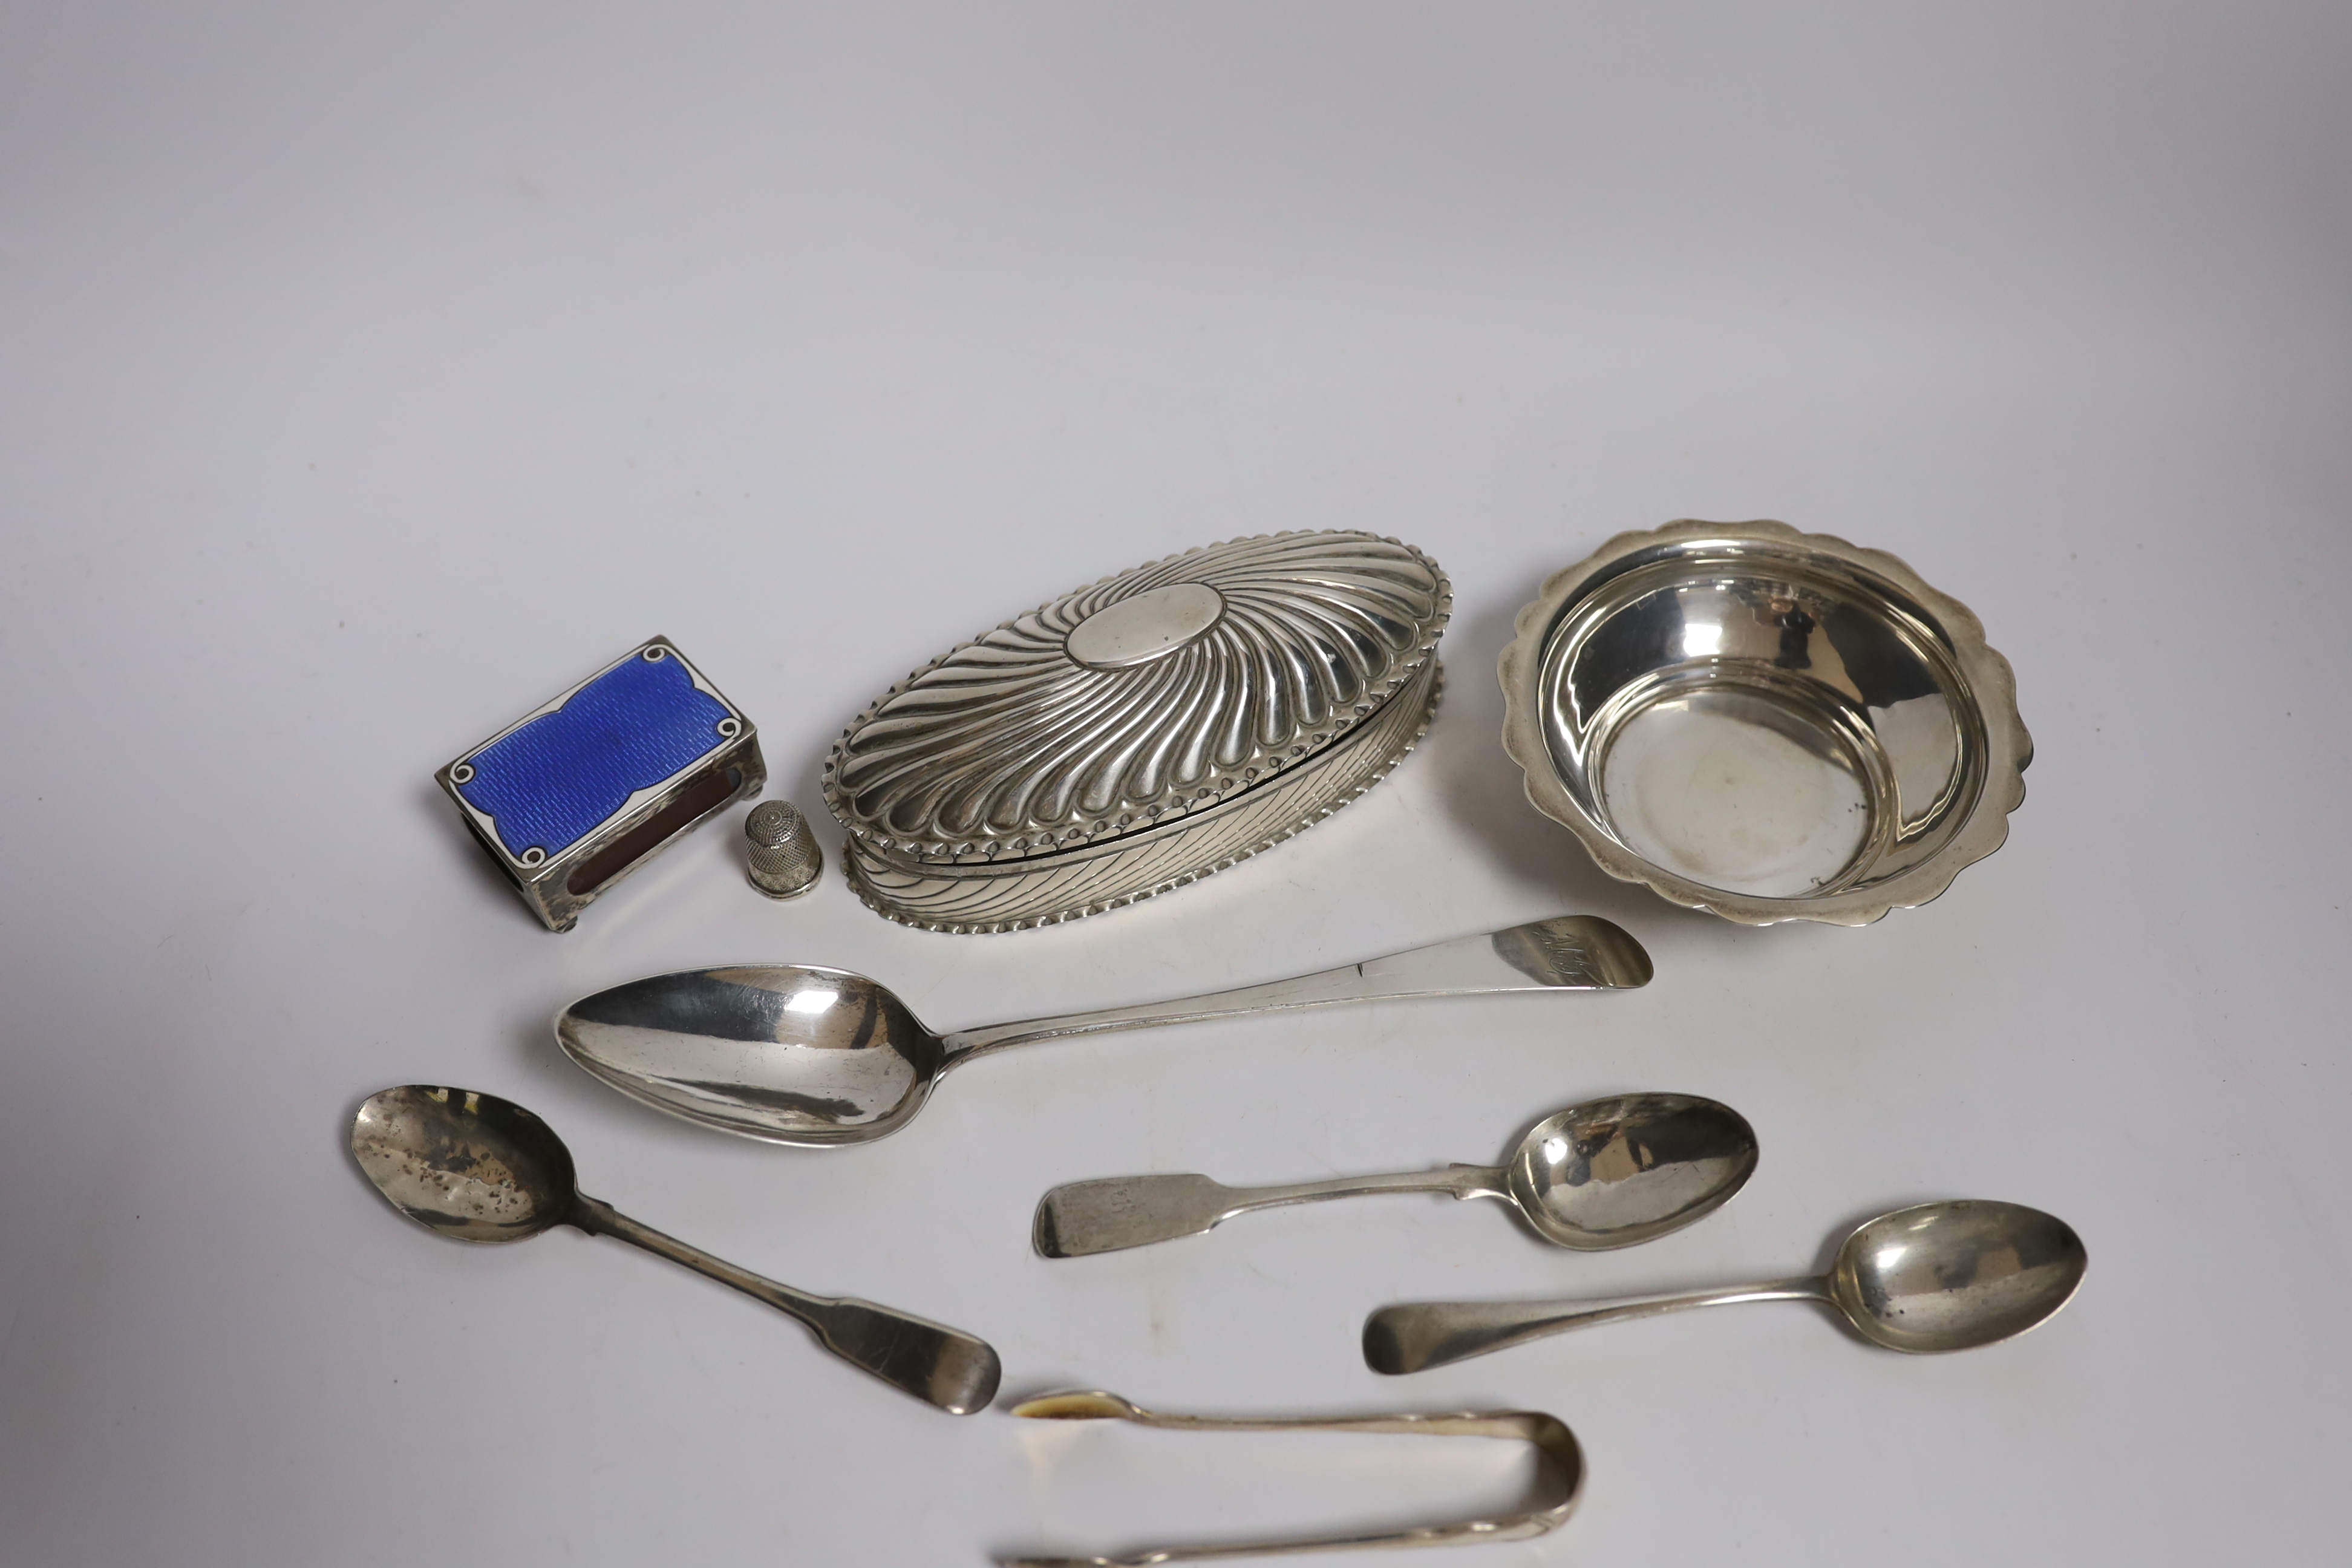 A late Victorian repousse silver oval trinket box by Horton & Allday, Birmingham, 1890, 15.2cm, together with five items of silver flatware, a silver bowl, silver and enamel matchbox sleeve and a sterling thimble.